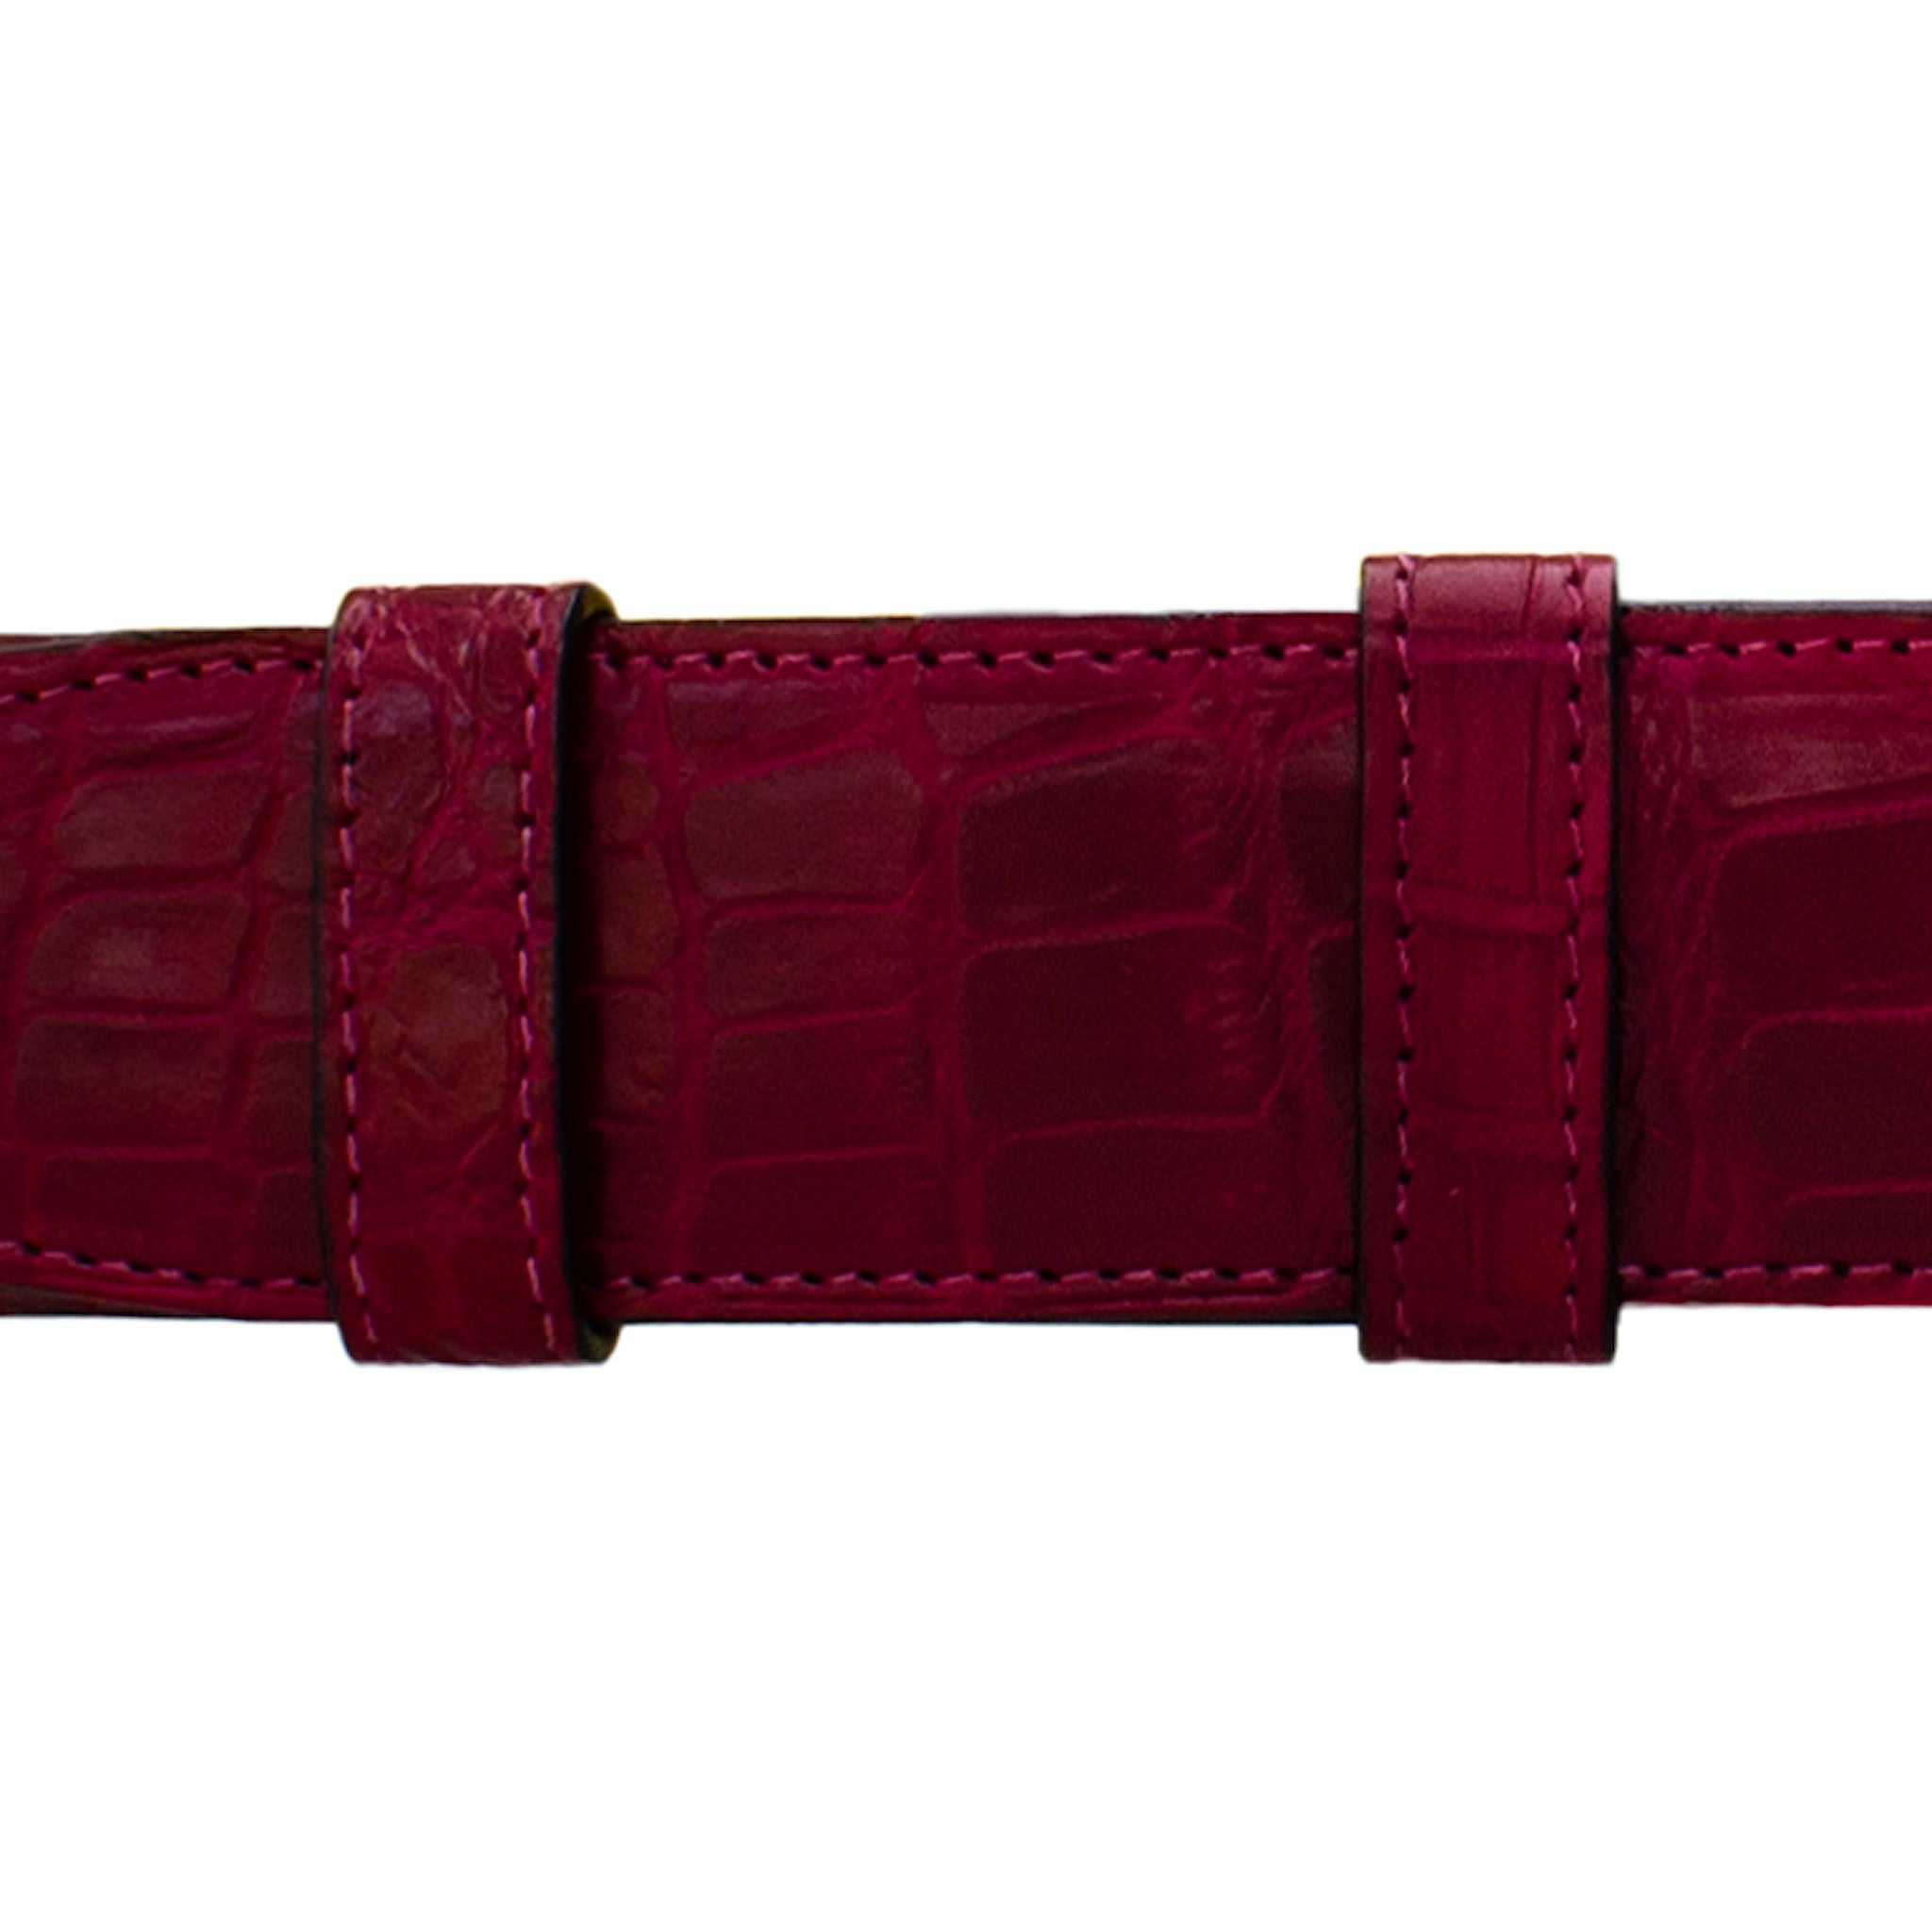 1" Garnet Classic Belt with Crawford Casual Buckle in Brass